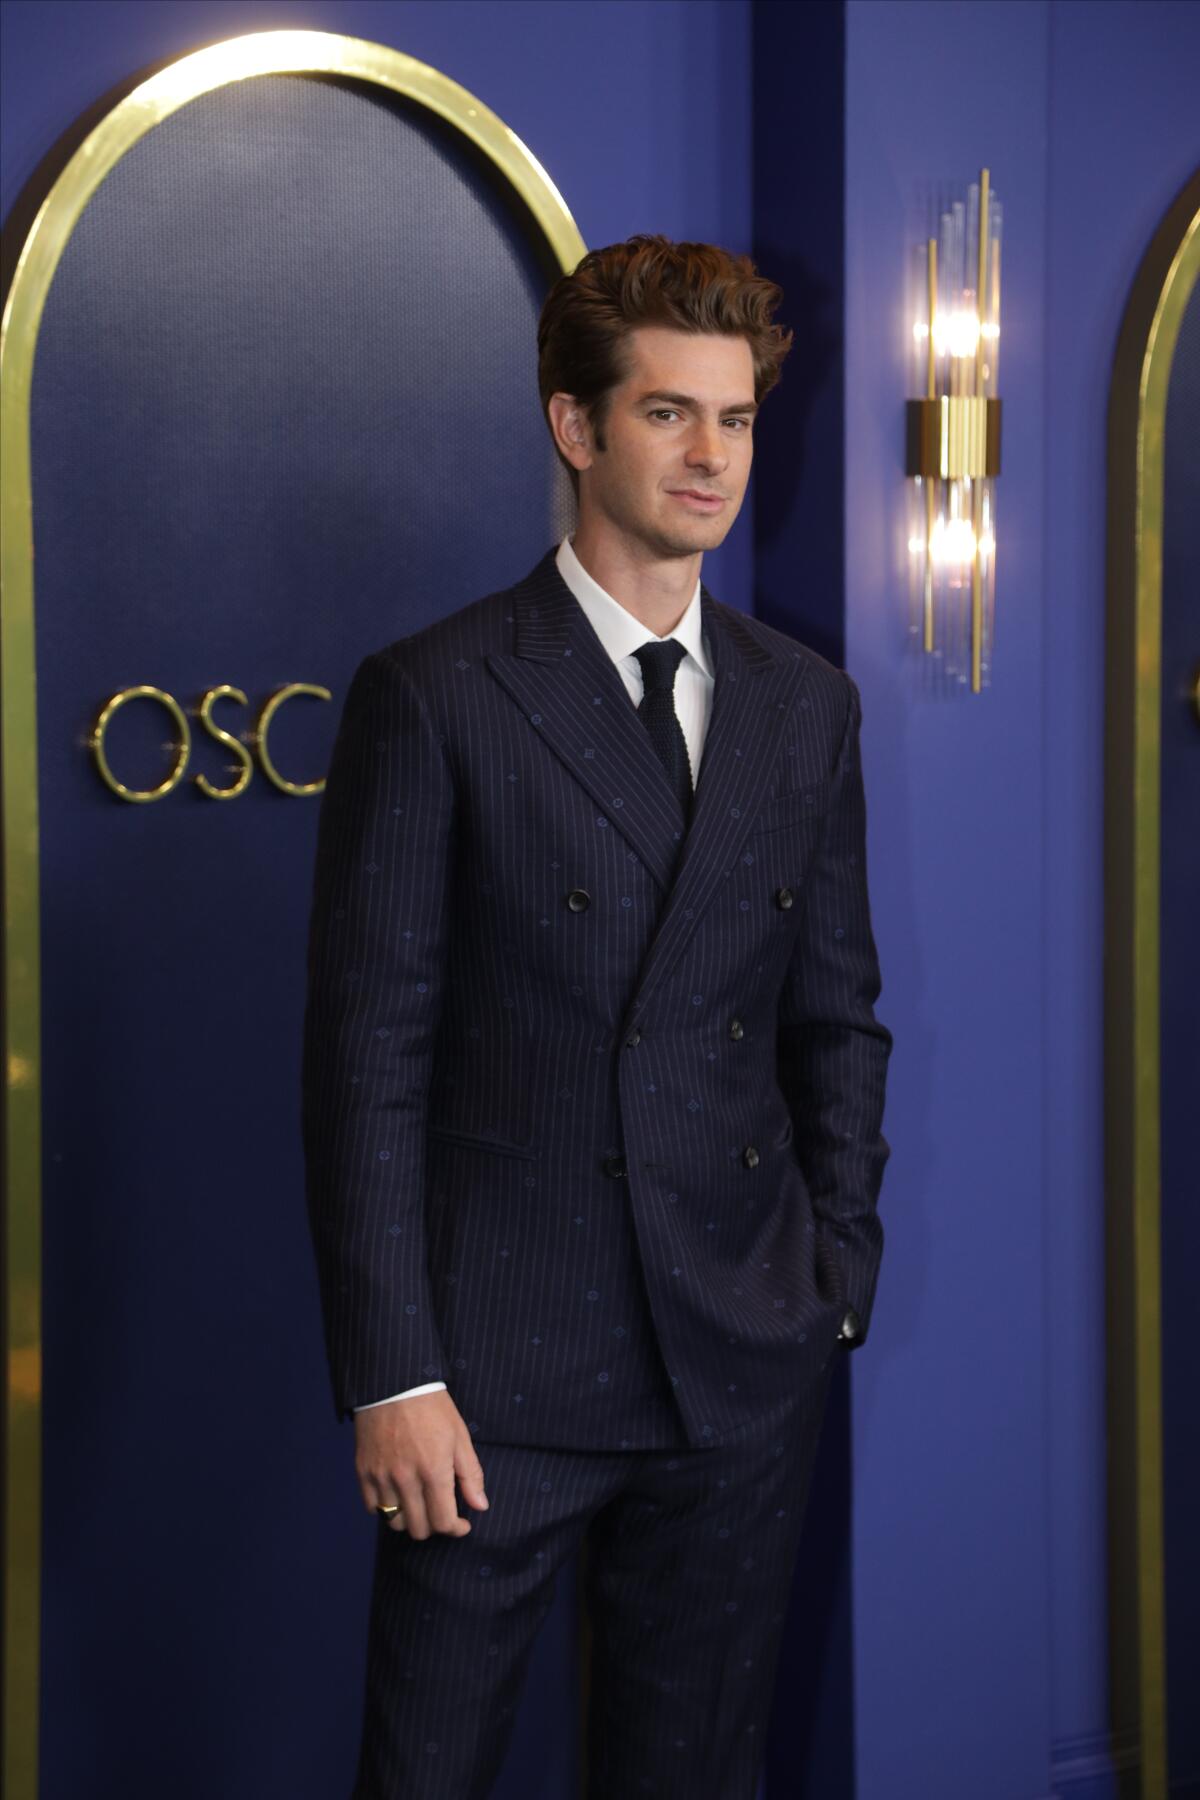 A man wearing a suit stands in front of a wall with the word Oscars on it.